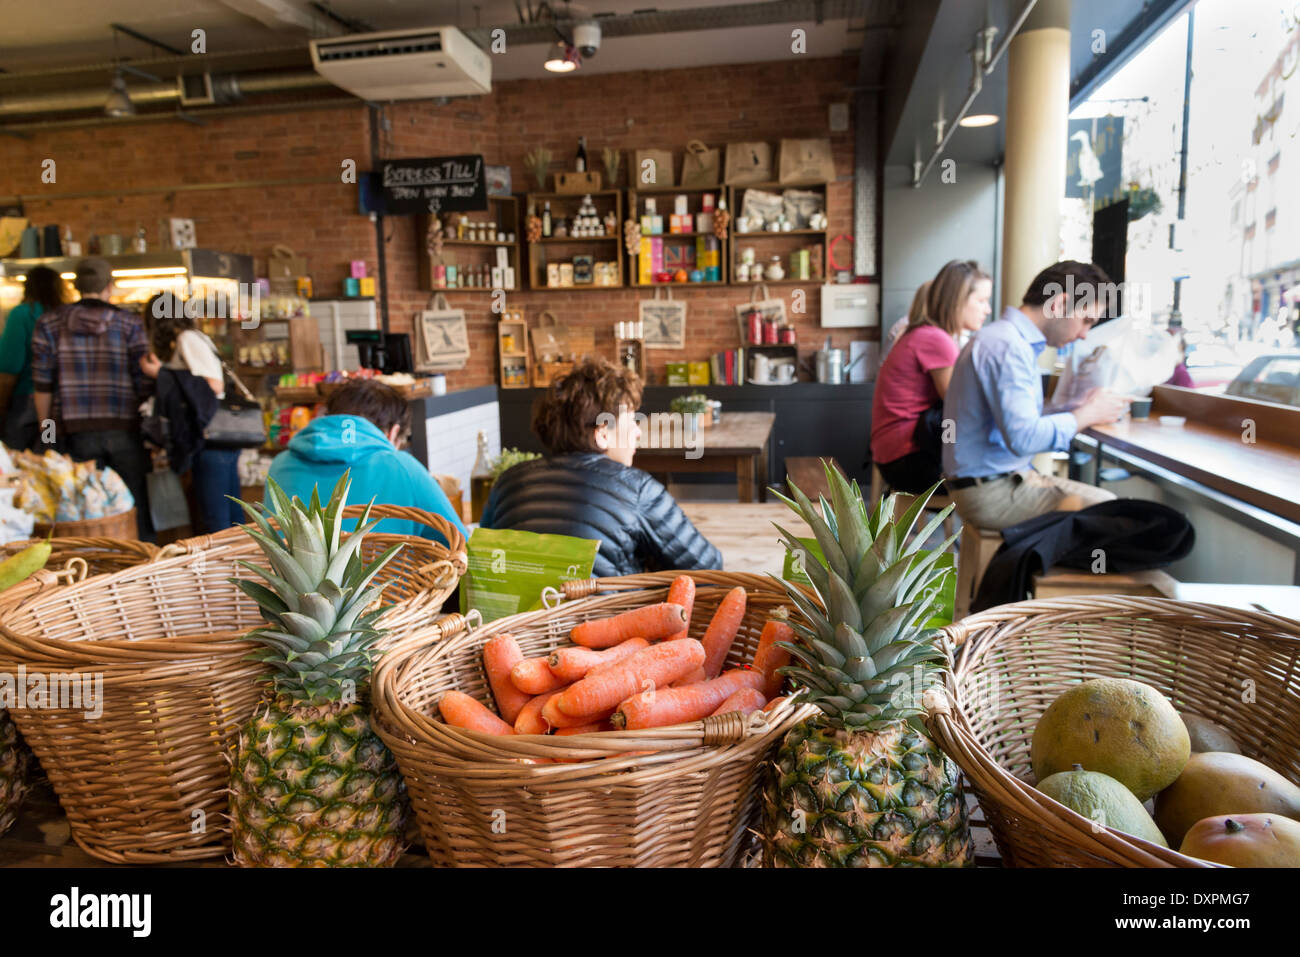 The Natural Kitchen healthy food shop and cafe in Marylebone High Street, London, England, UK Stock Photo